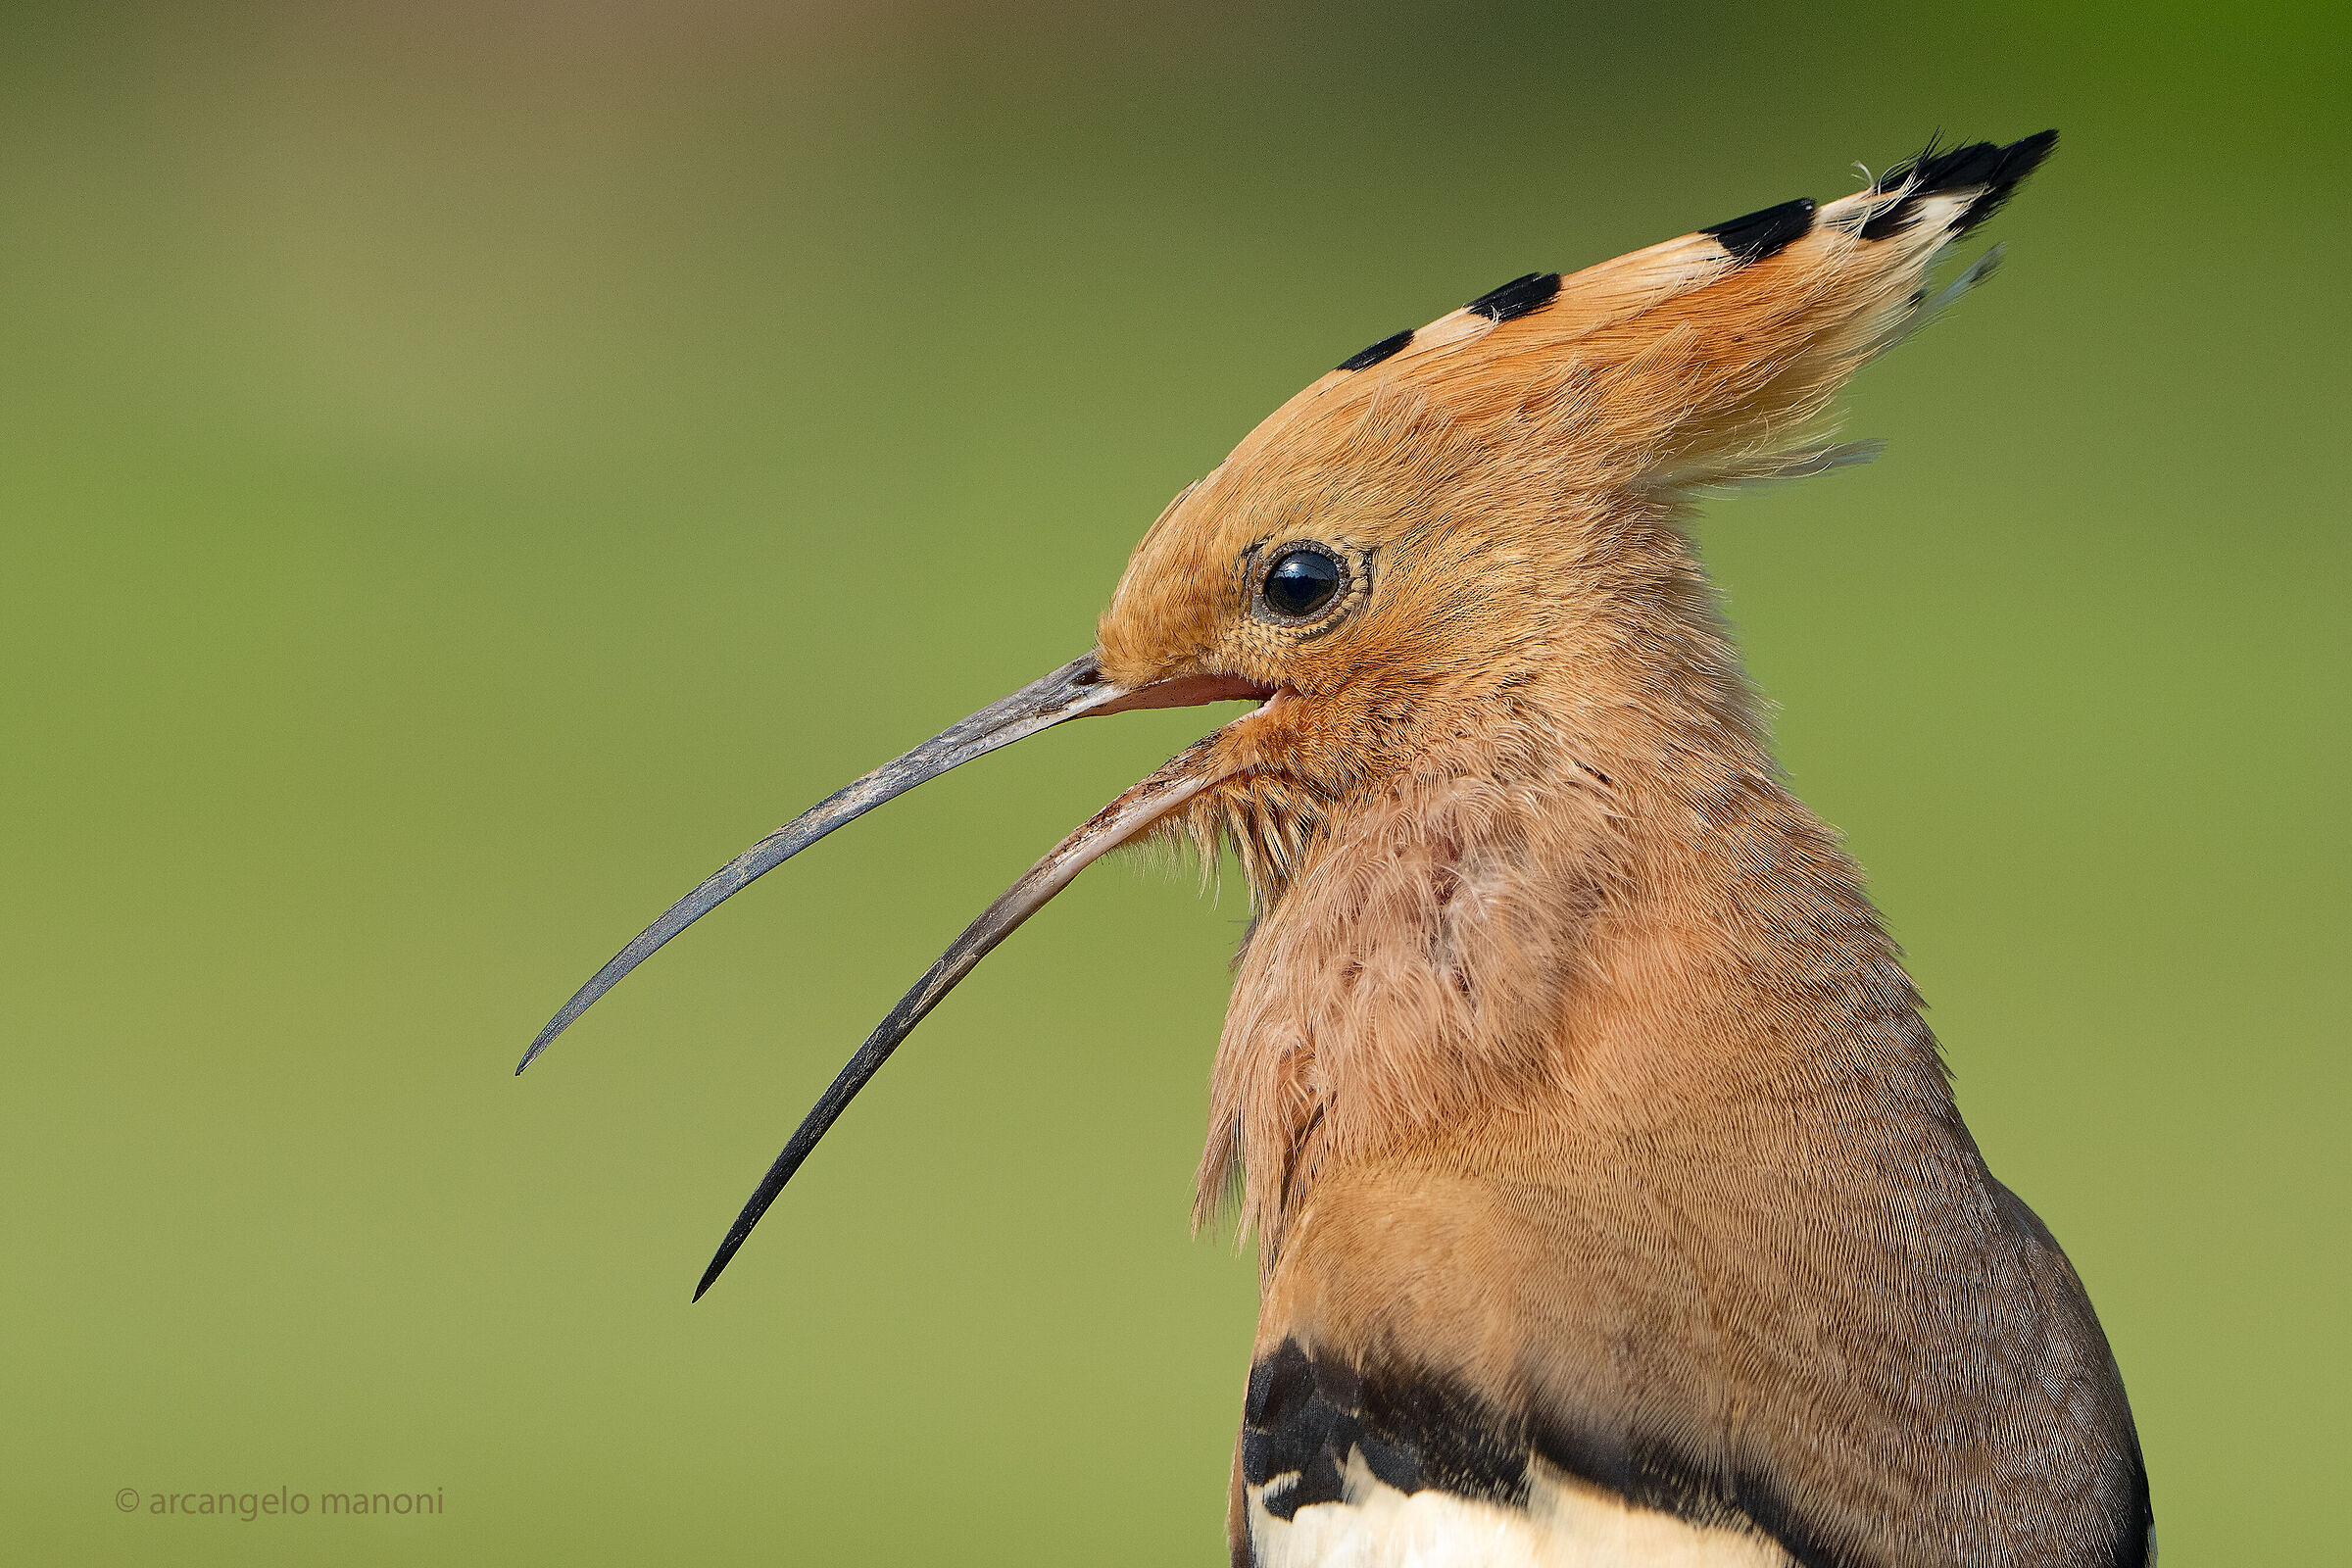 The verse of the hoopoe...